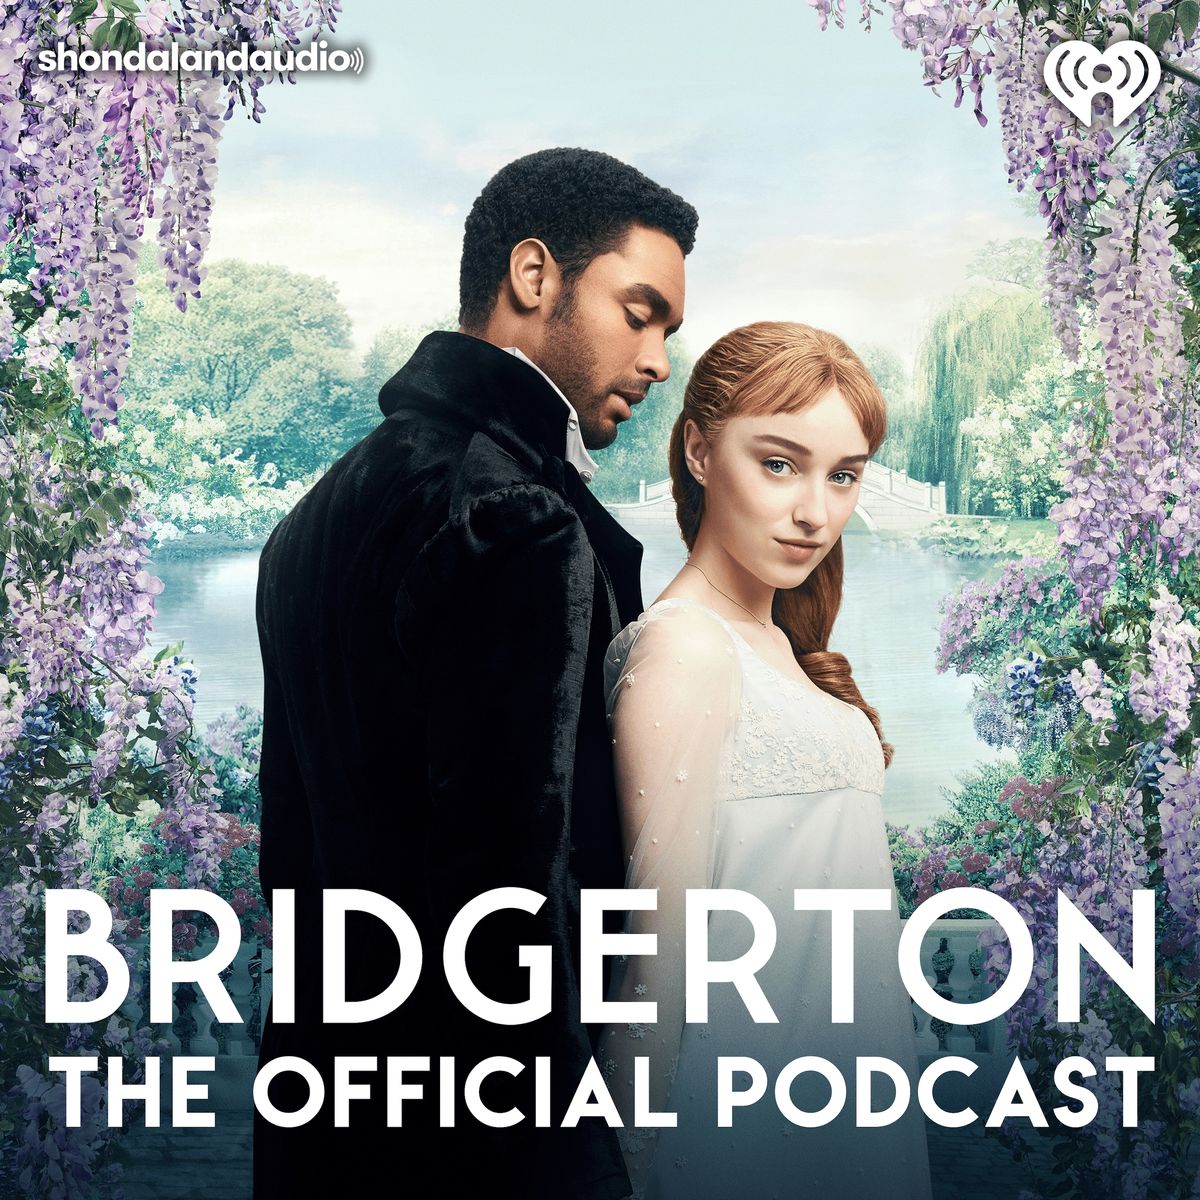 "bridgerton the official podcast" from shondaland audio